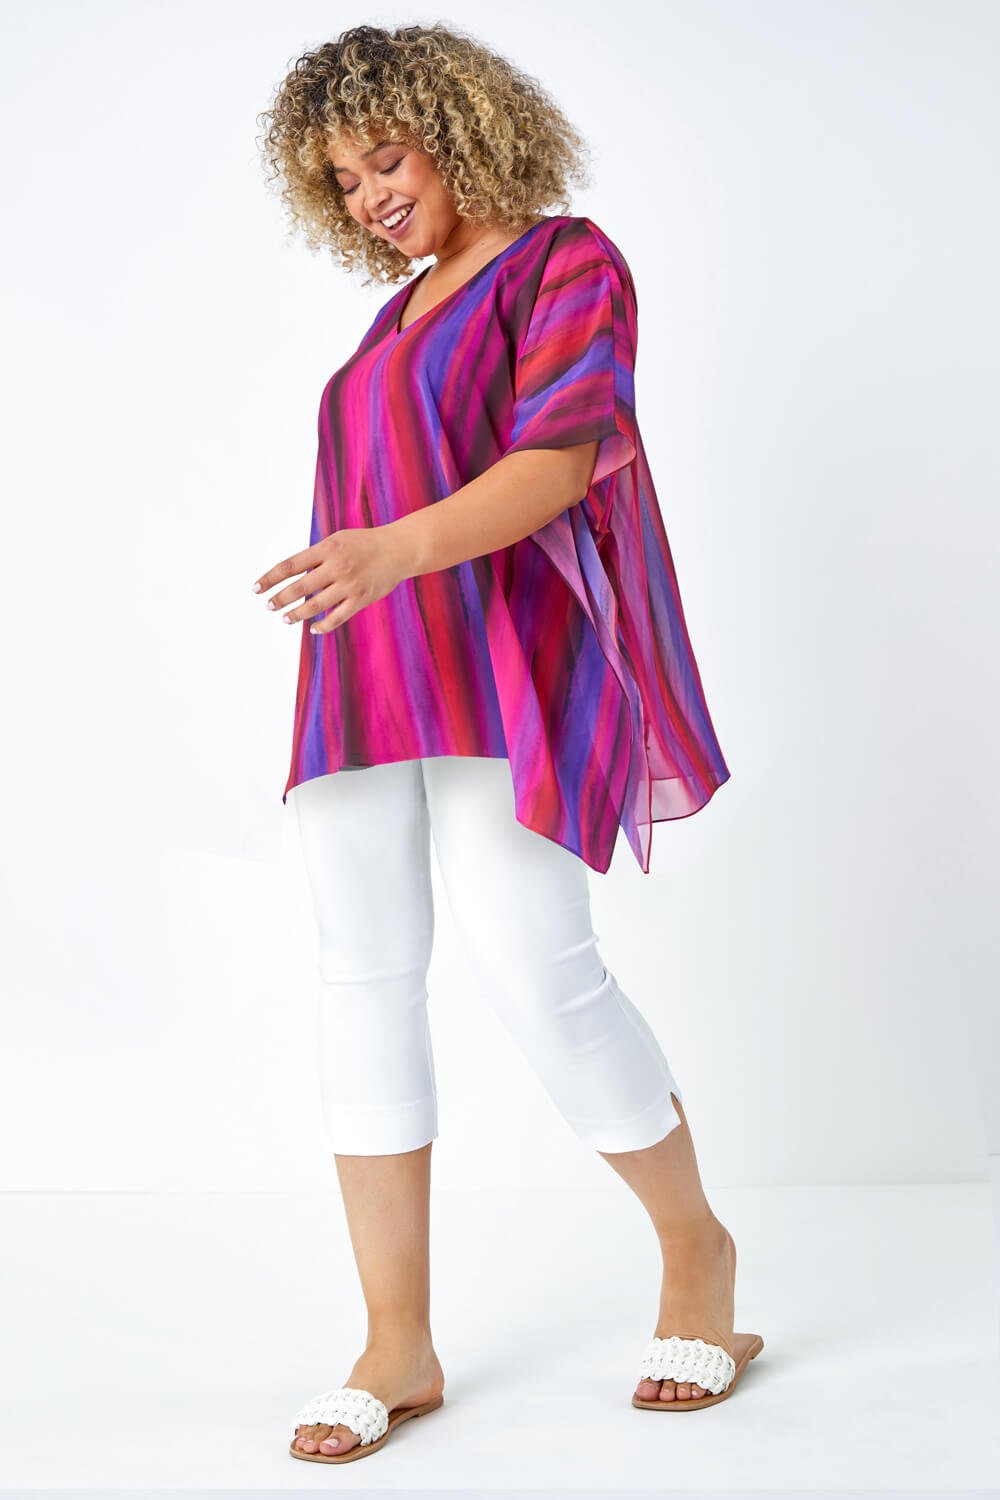 PINK Curve Stripe Chiffon Overlay Top, Image 2 of 5